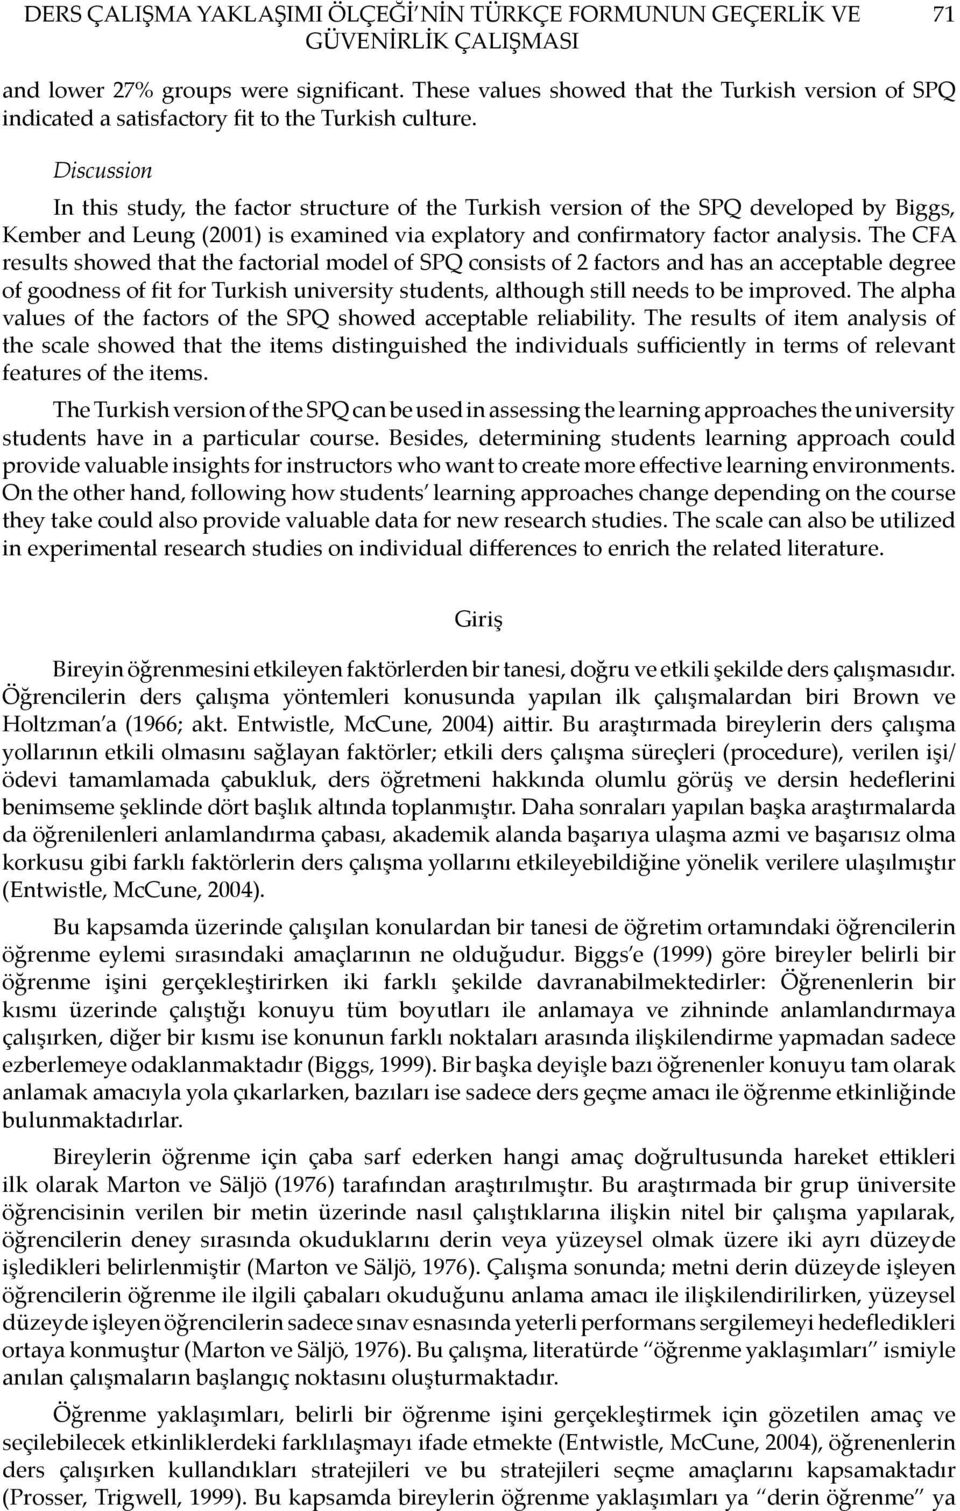 Discussion In this study, the factor structure of the Turkish version of the SPQ developed by Biggs, Kember and Leung (2001) is examined via explatory and confirmatory factor analysis.